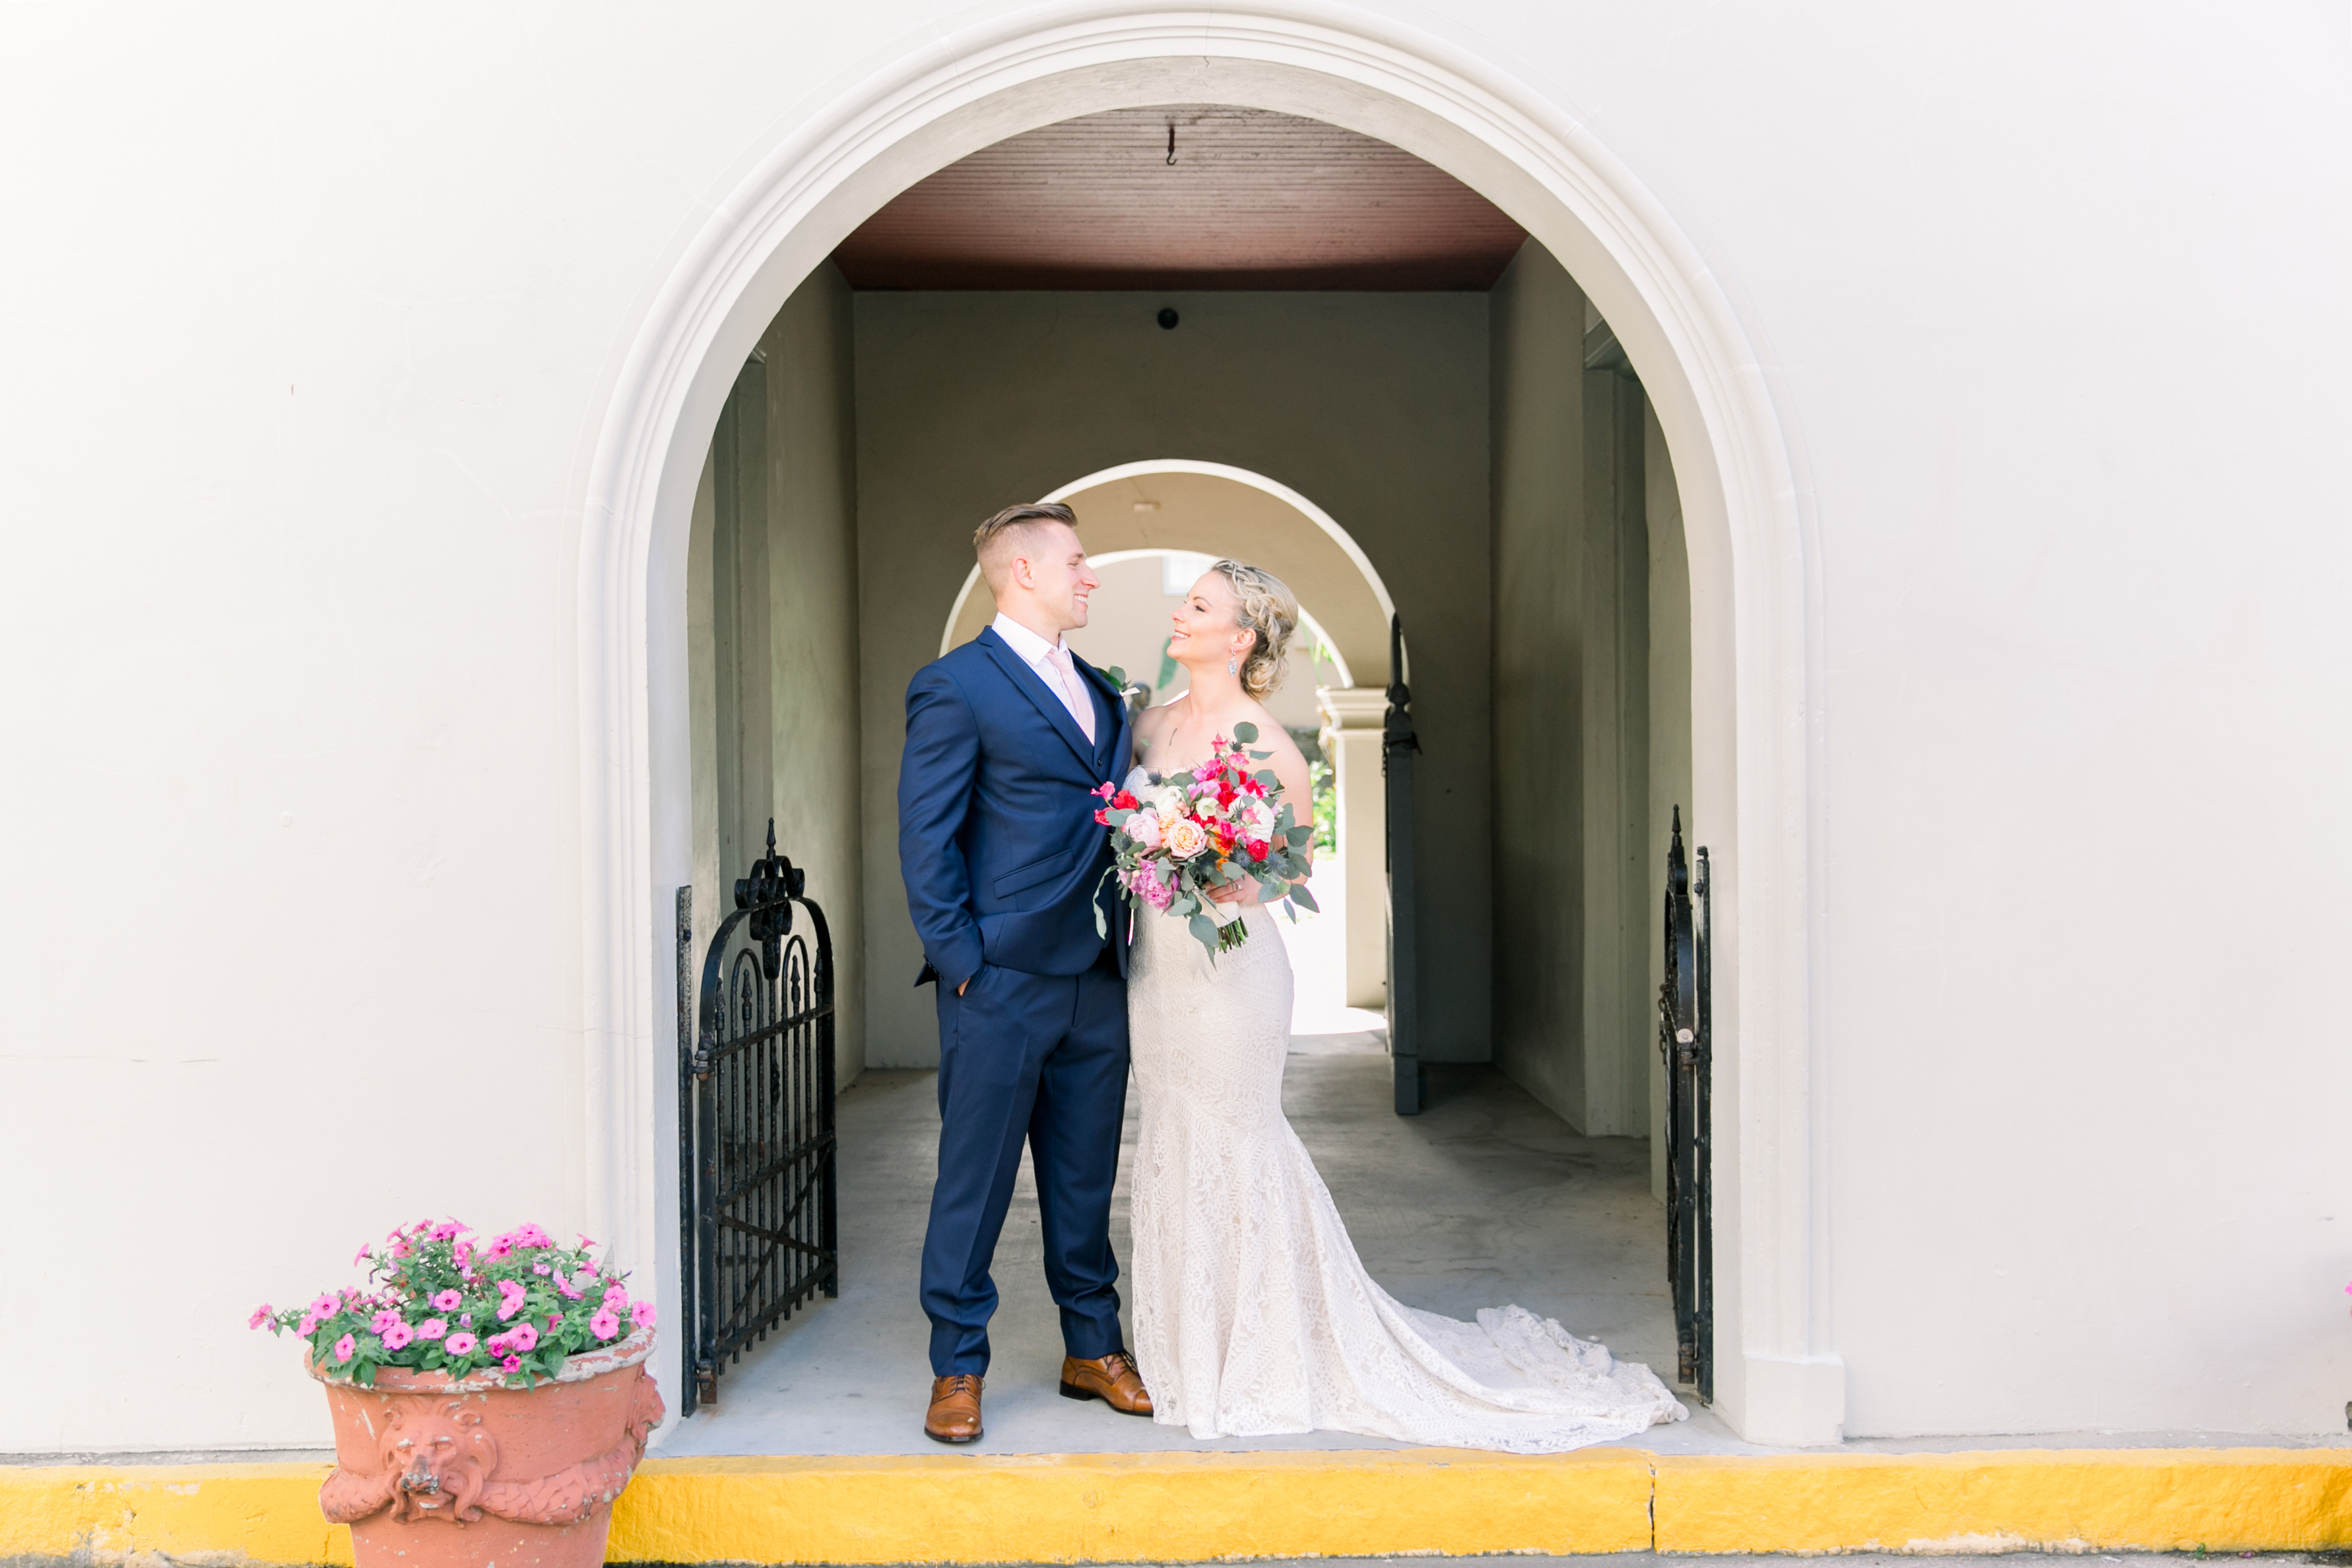 Couple standing together in arch way saint augustine florida